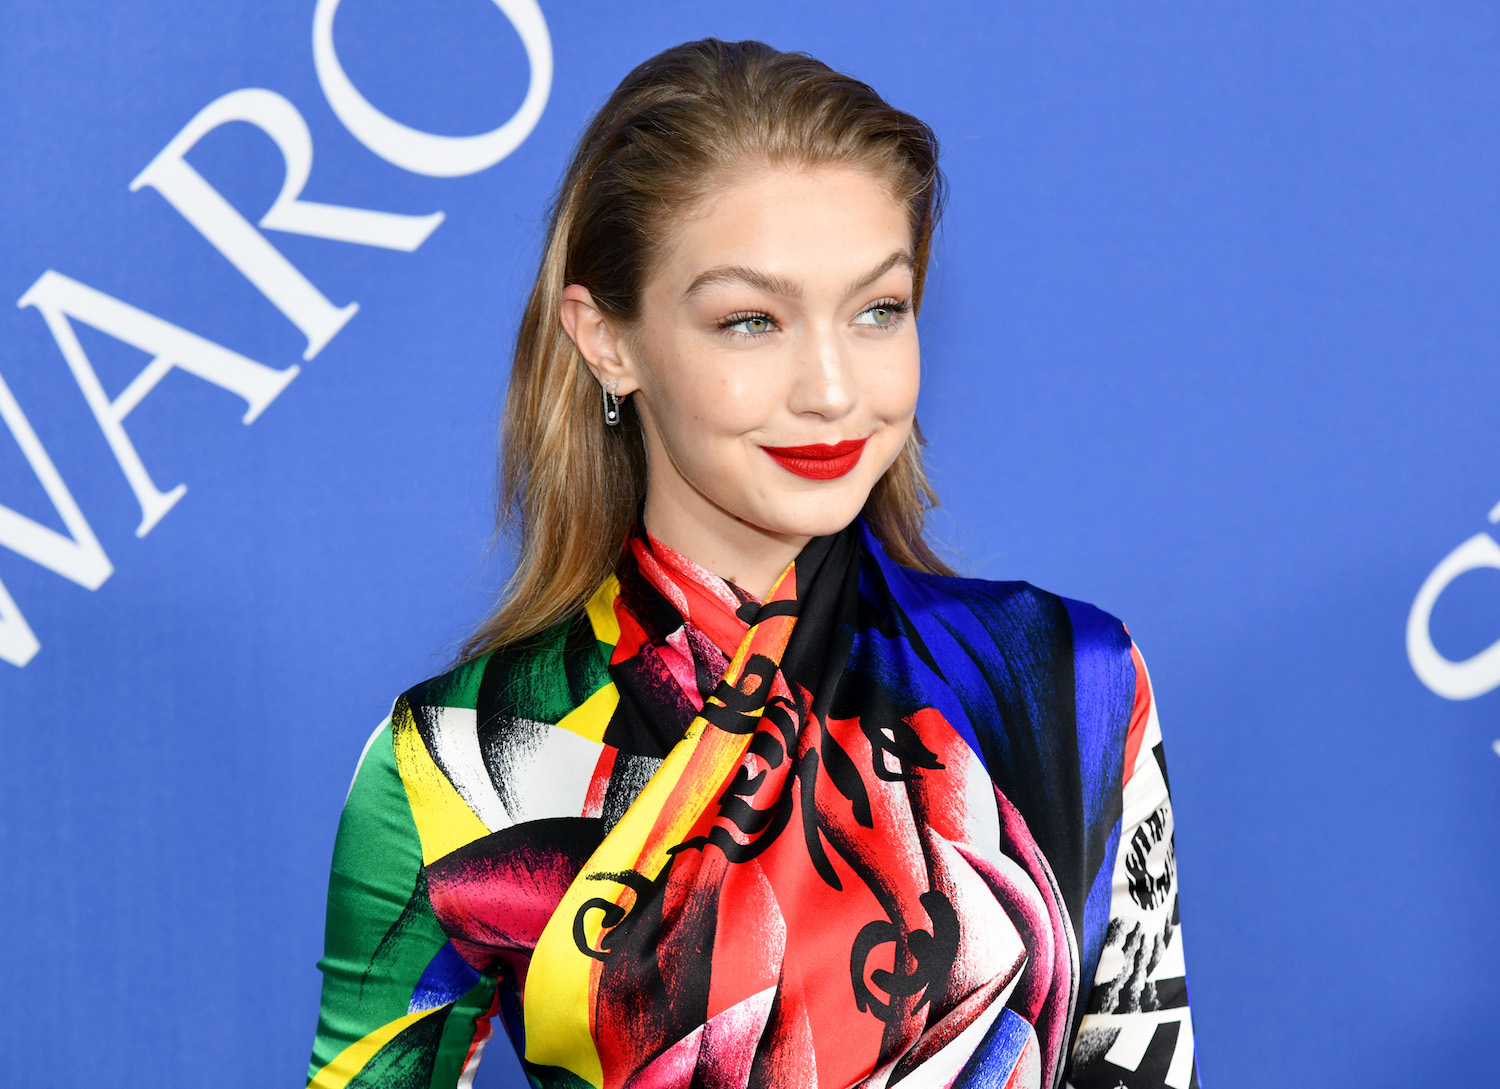 All Your Questions About Gigi Hadid, Answered